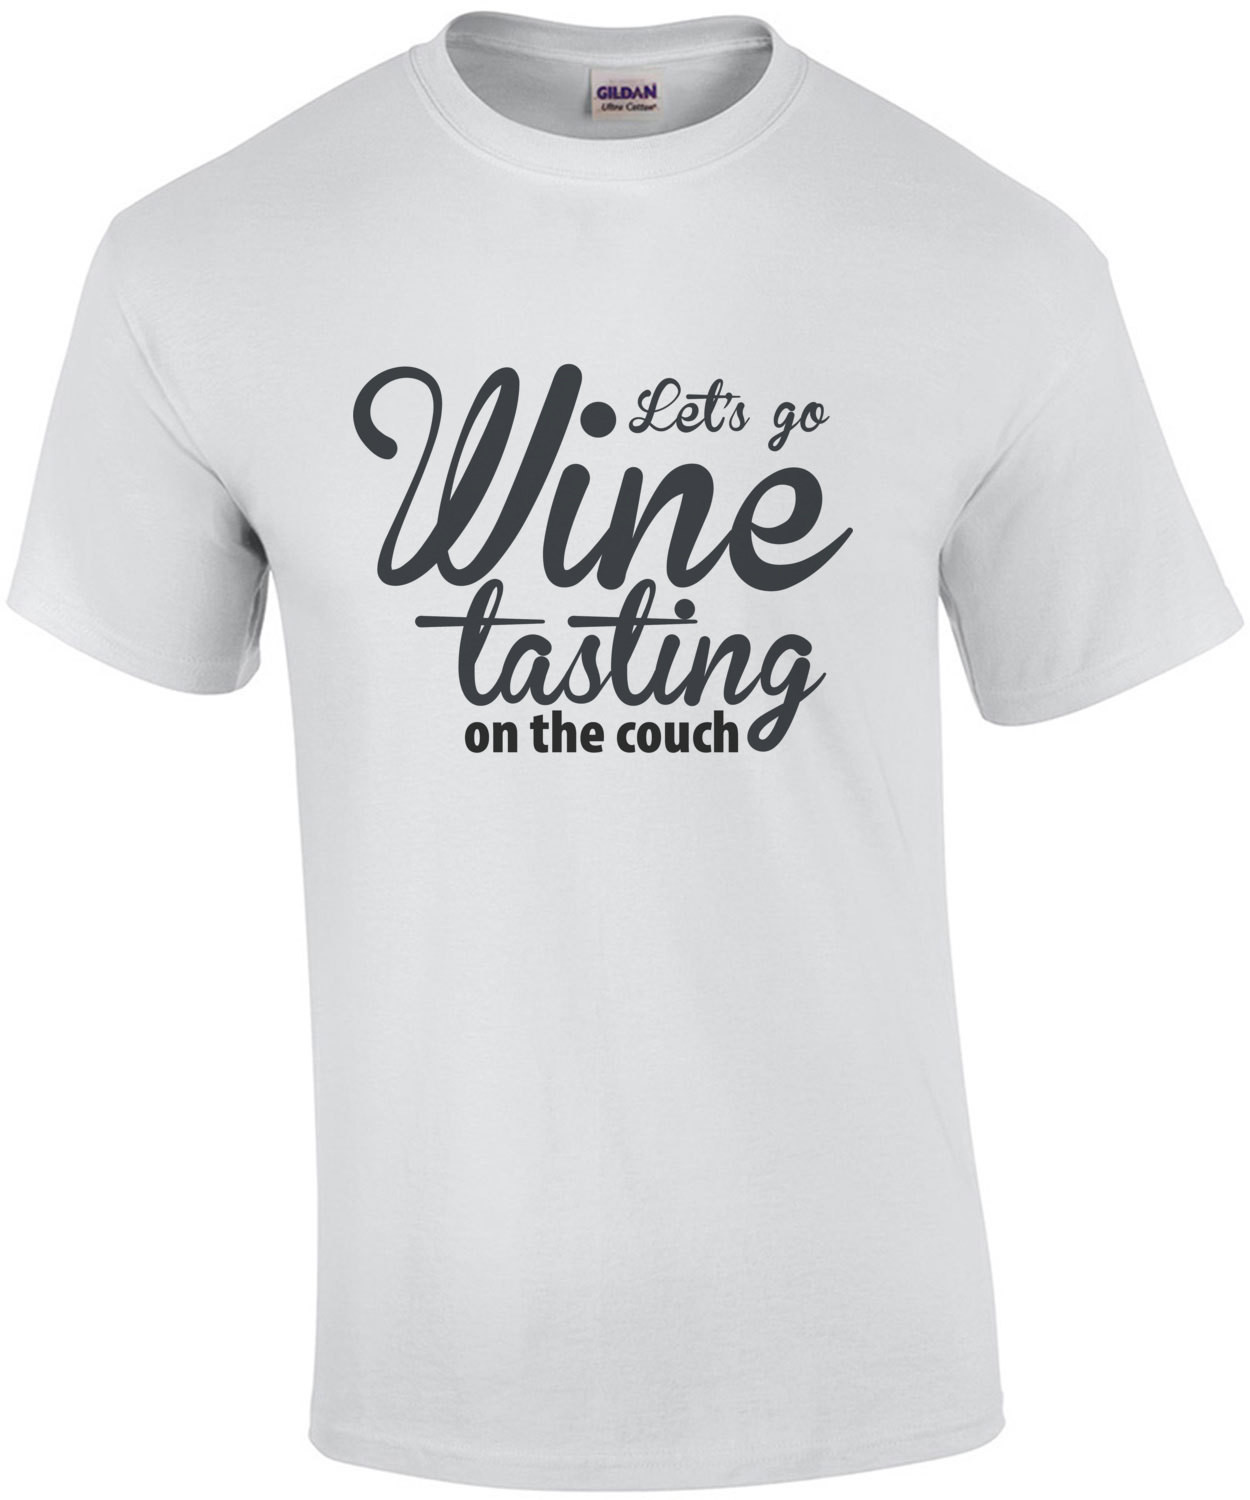 Let's go wine tasting on the couch - funny wine t-shirt